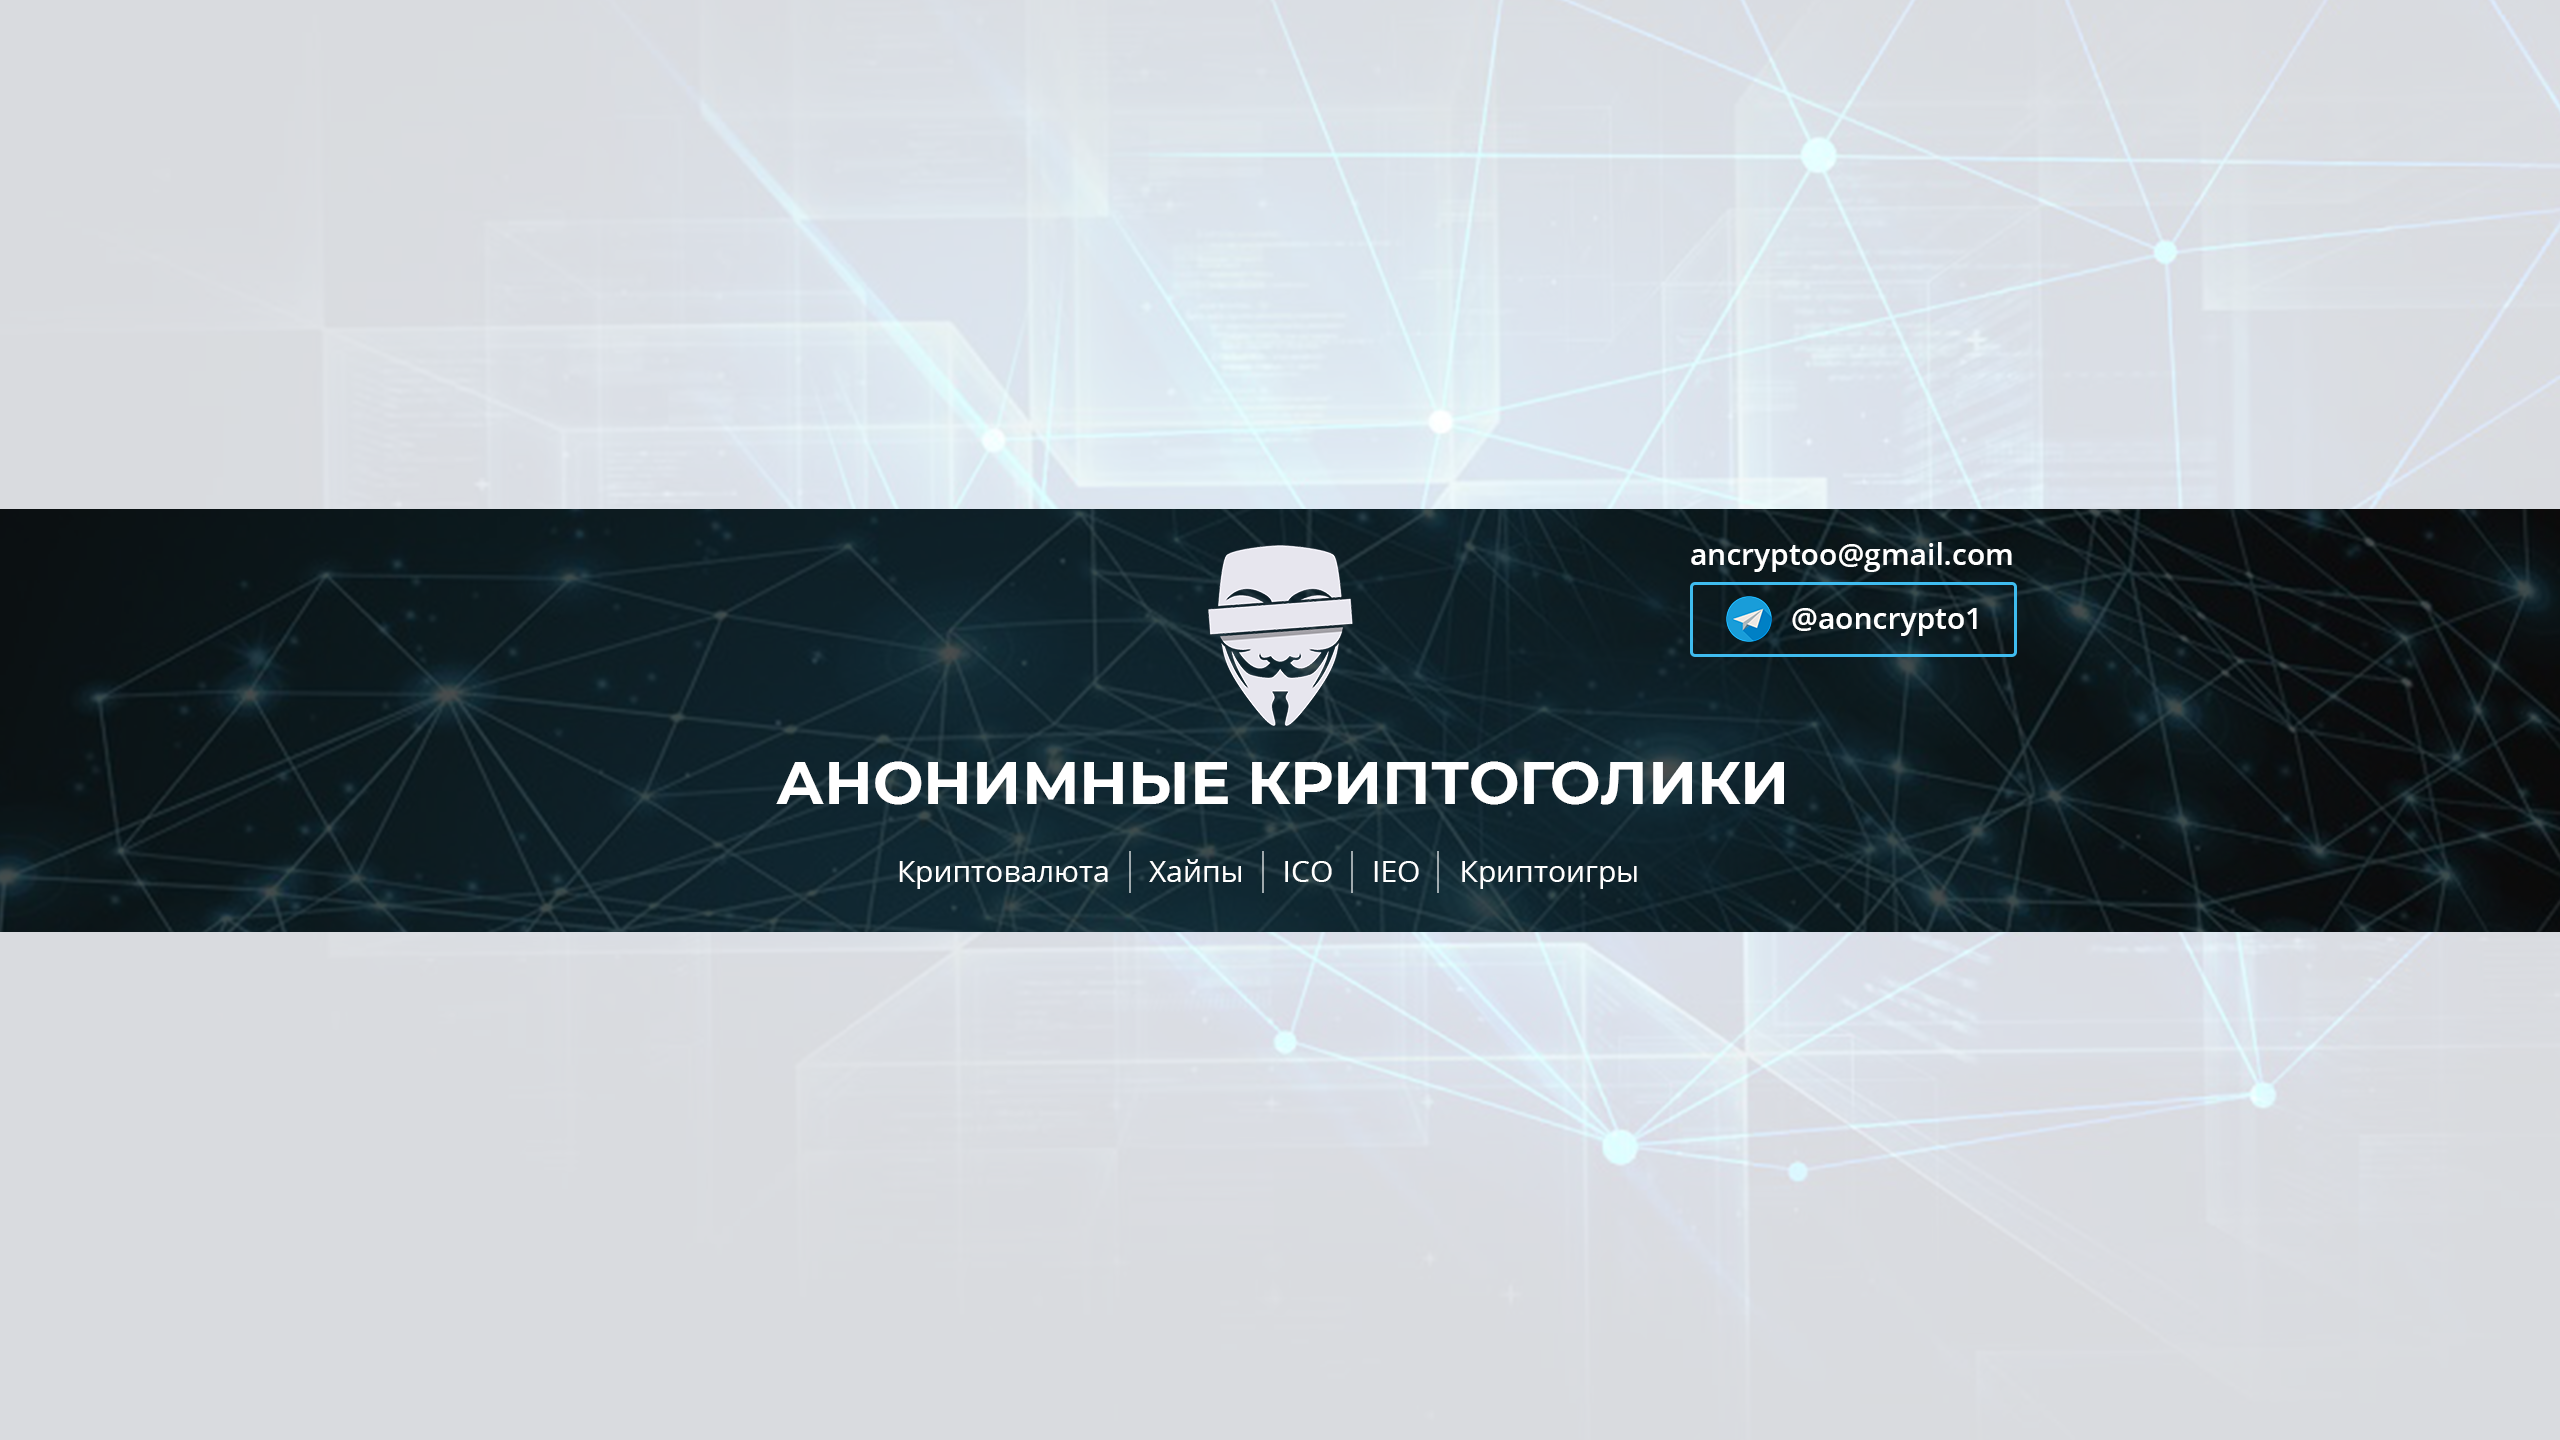 YouTUBE: IEO, ICO, Hyip, Dapps and Gambling reviews in Russian cover